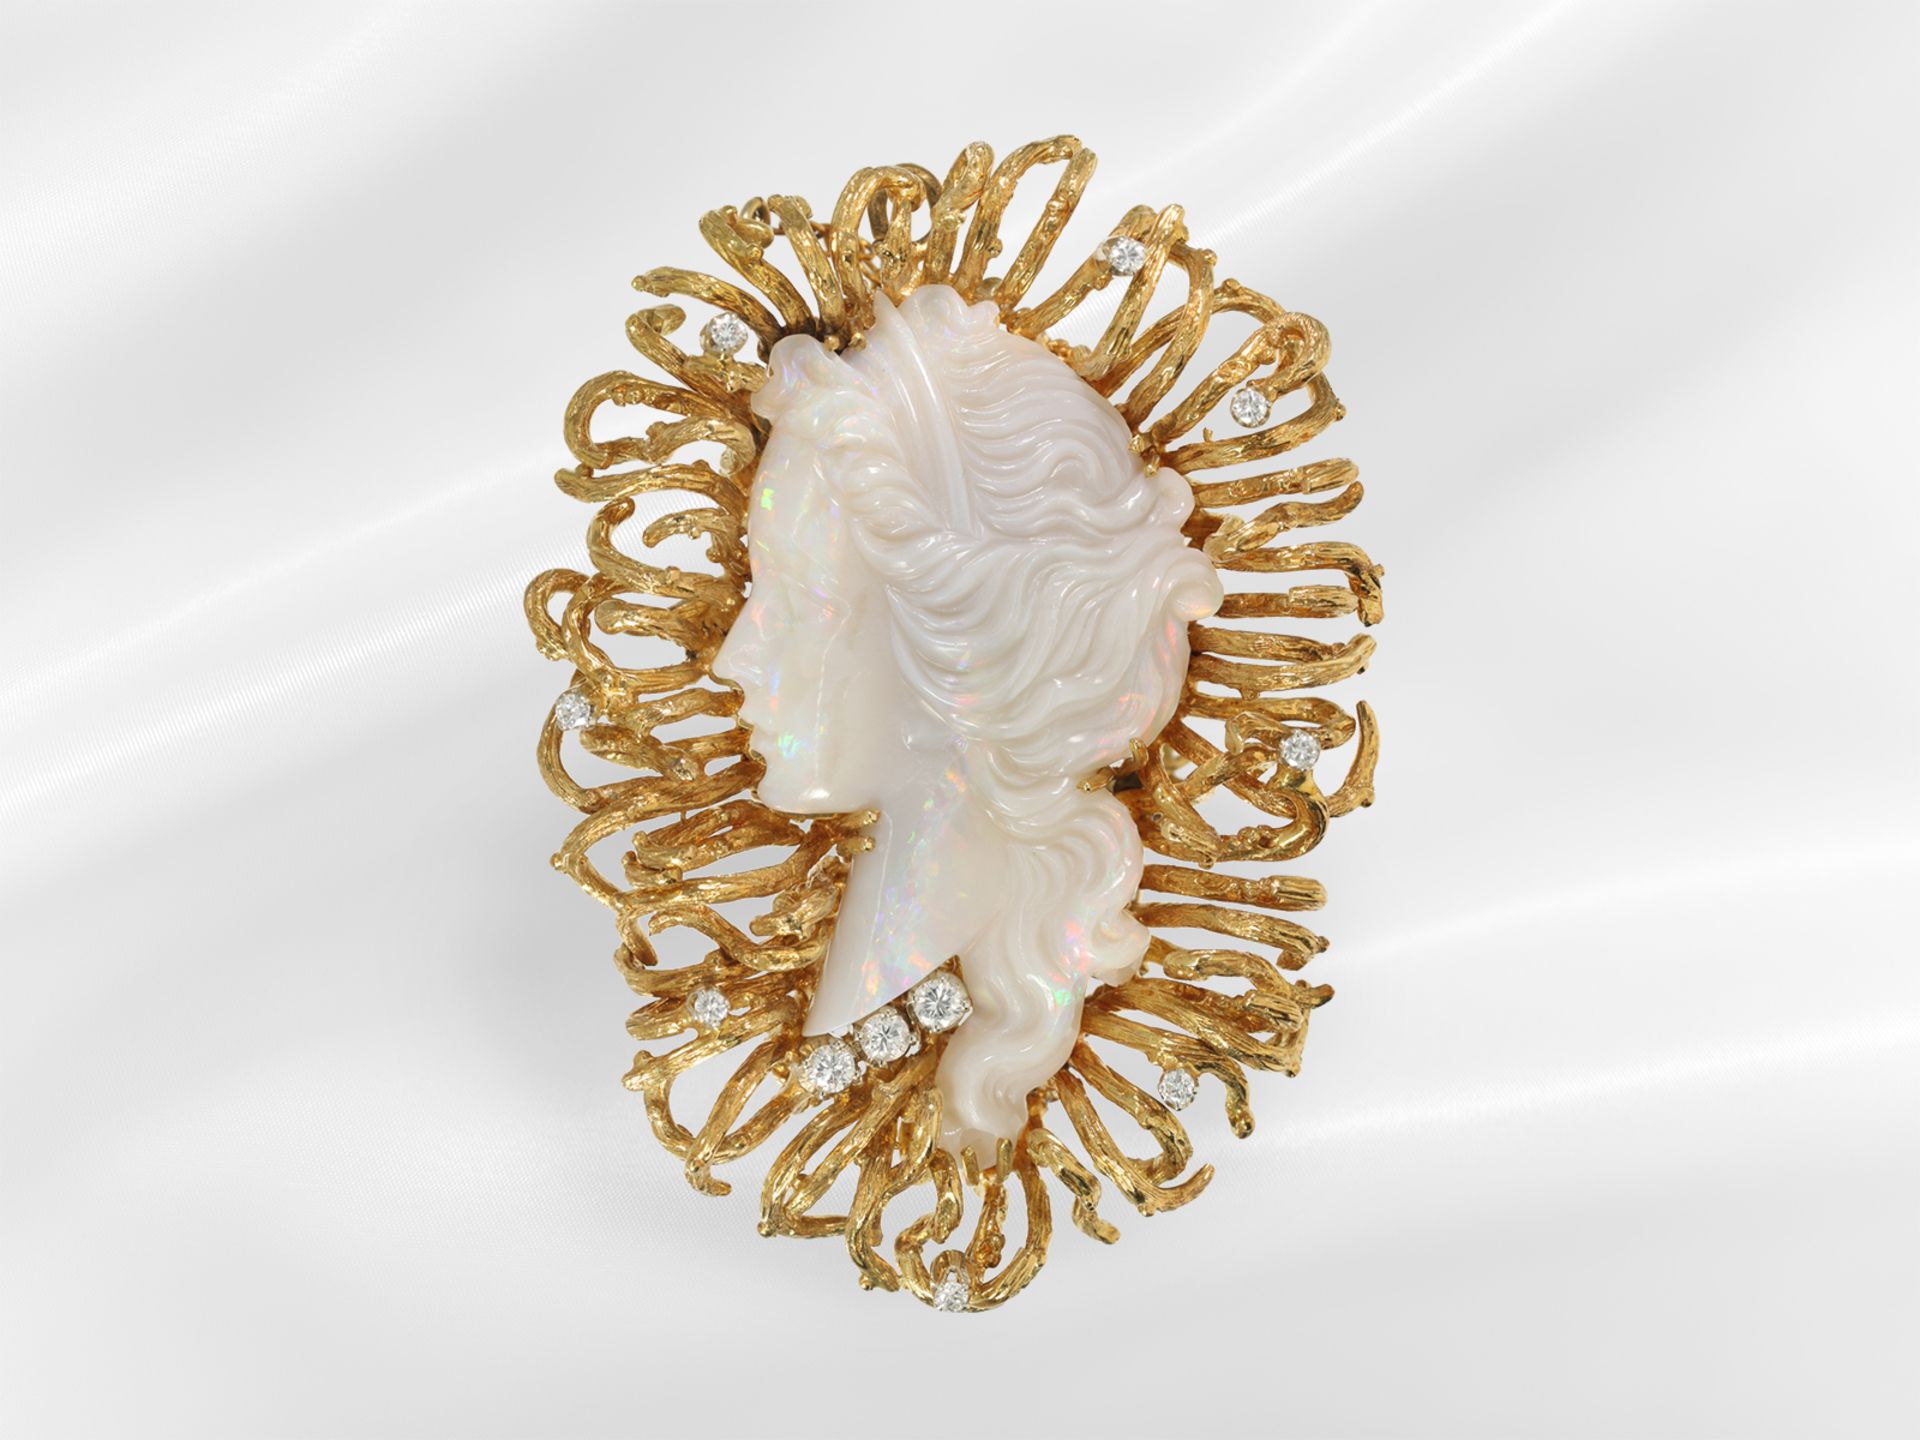 Brooch/pendant: unusual vintage goldsmith work with opal cameo, possibly Andrew Grima